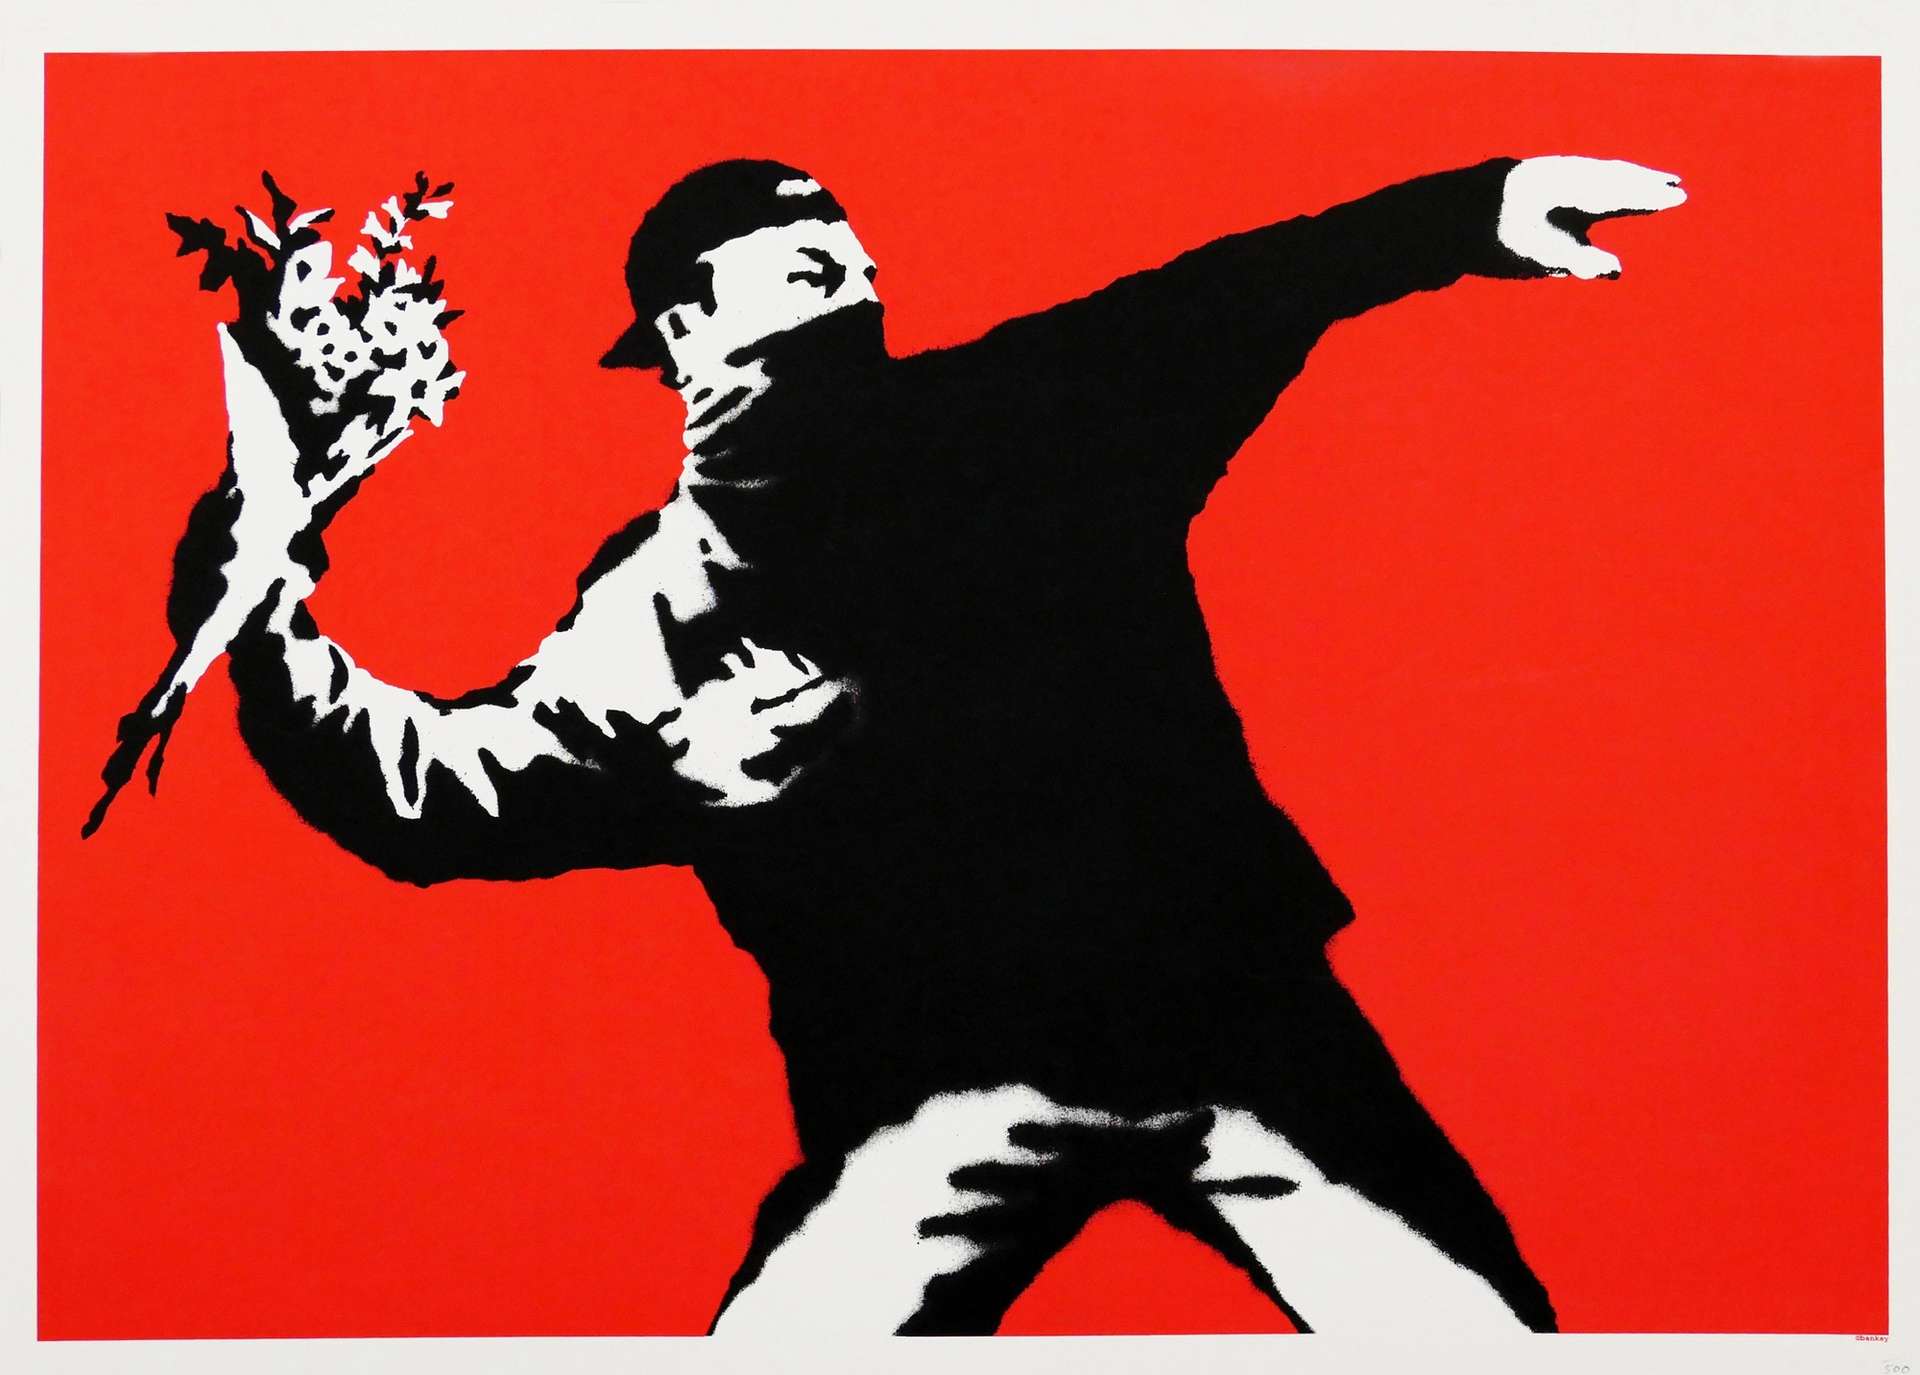 An unsigned screenprint by Banksy depicting a young man wearing a cap and face covering, about to launch a bouquet of flowers against a bright red background